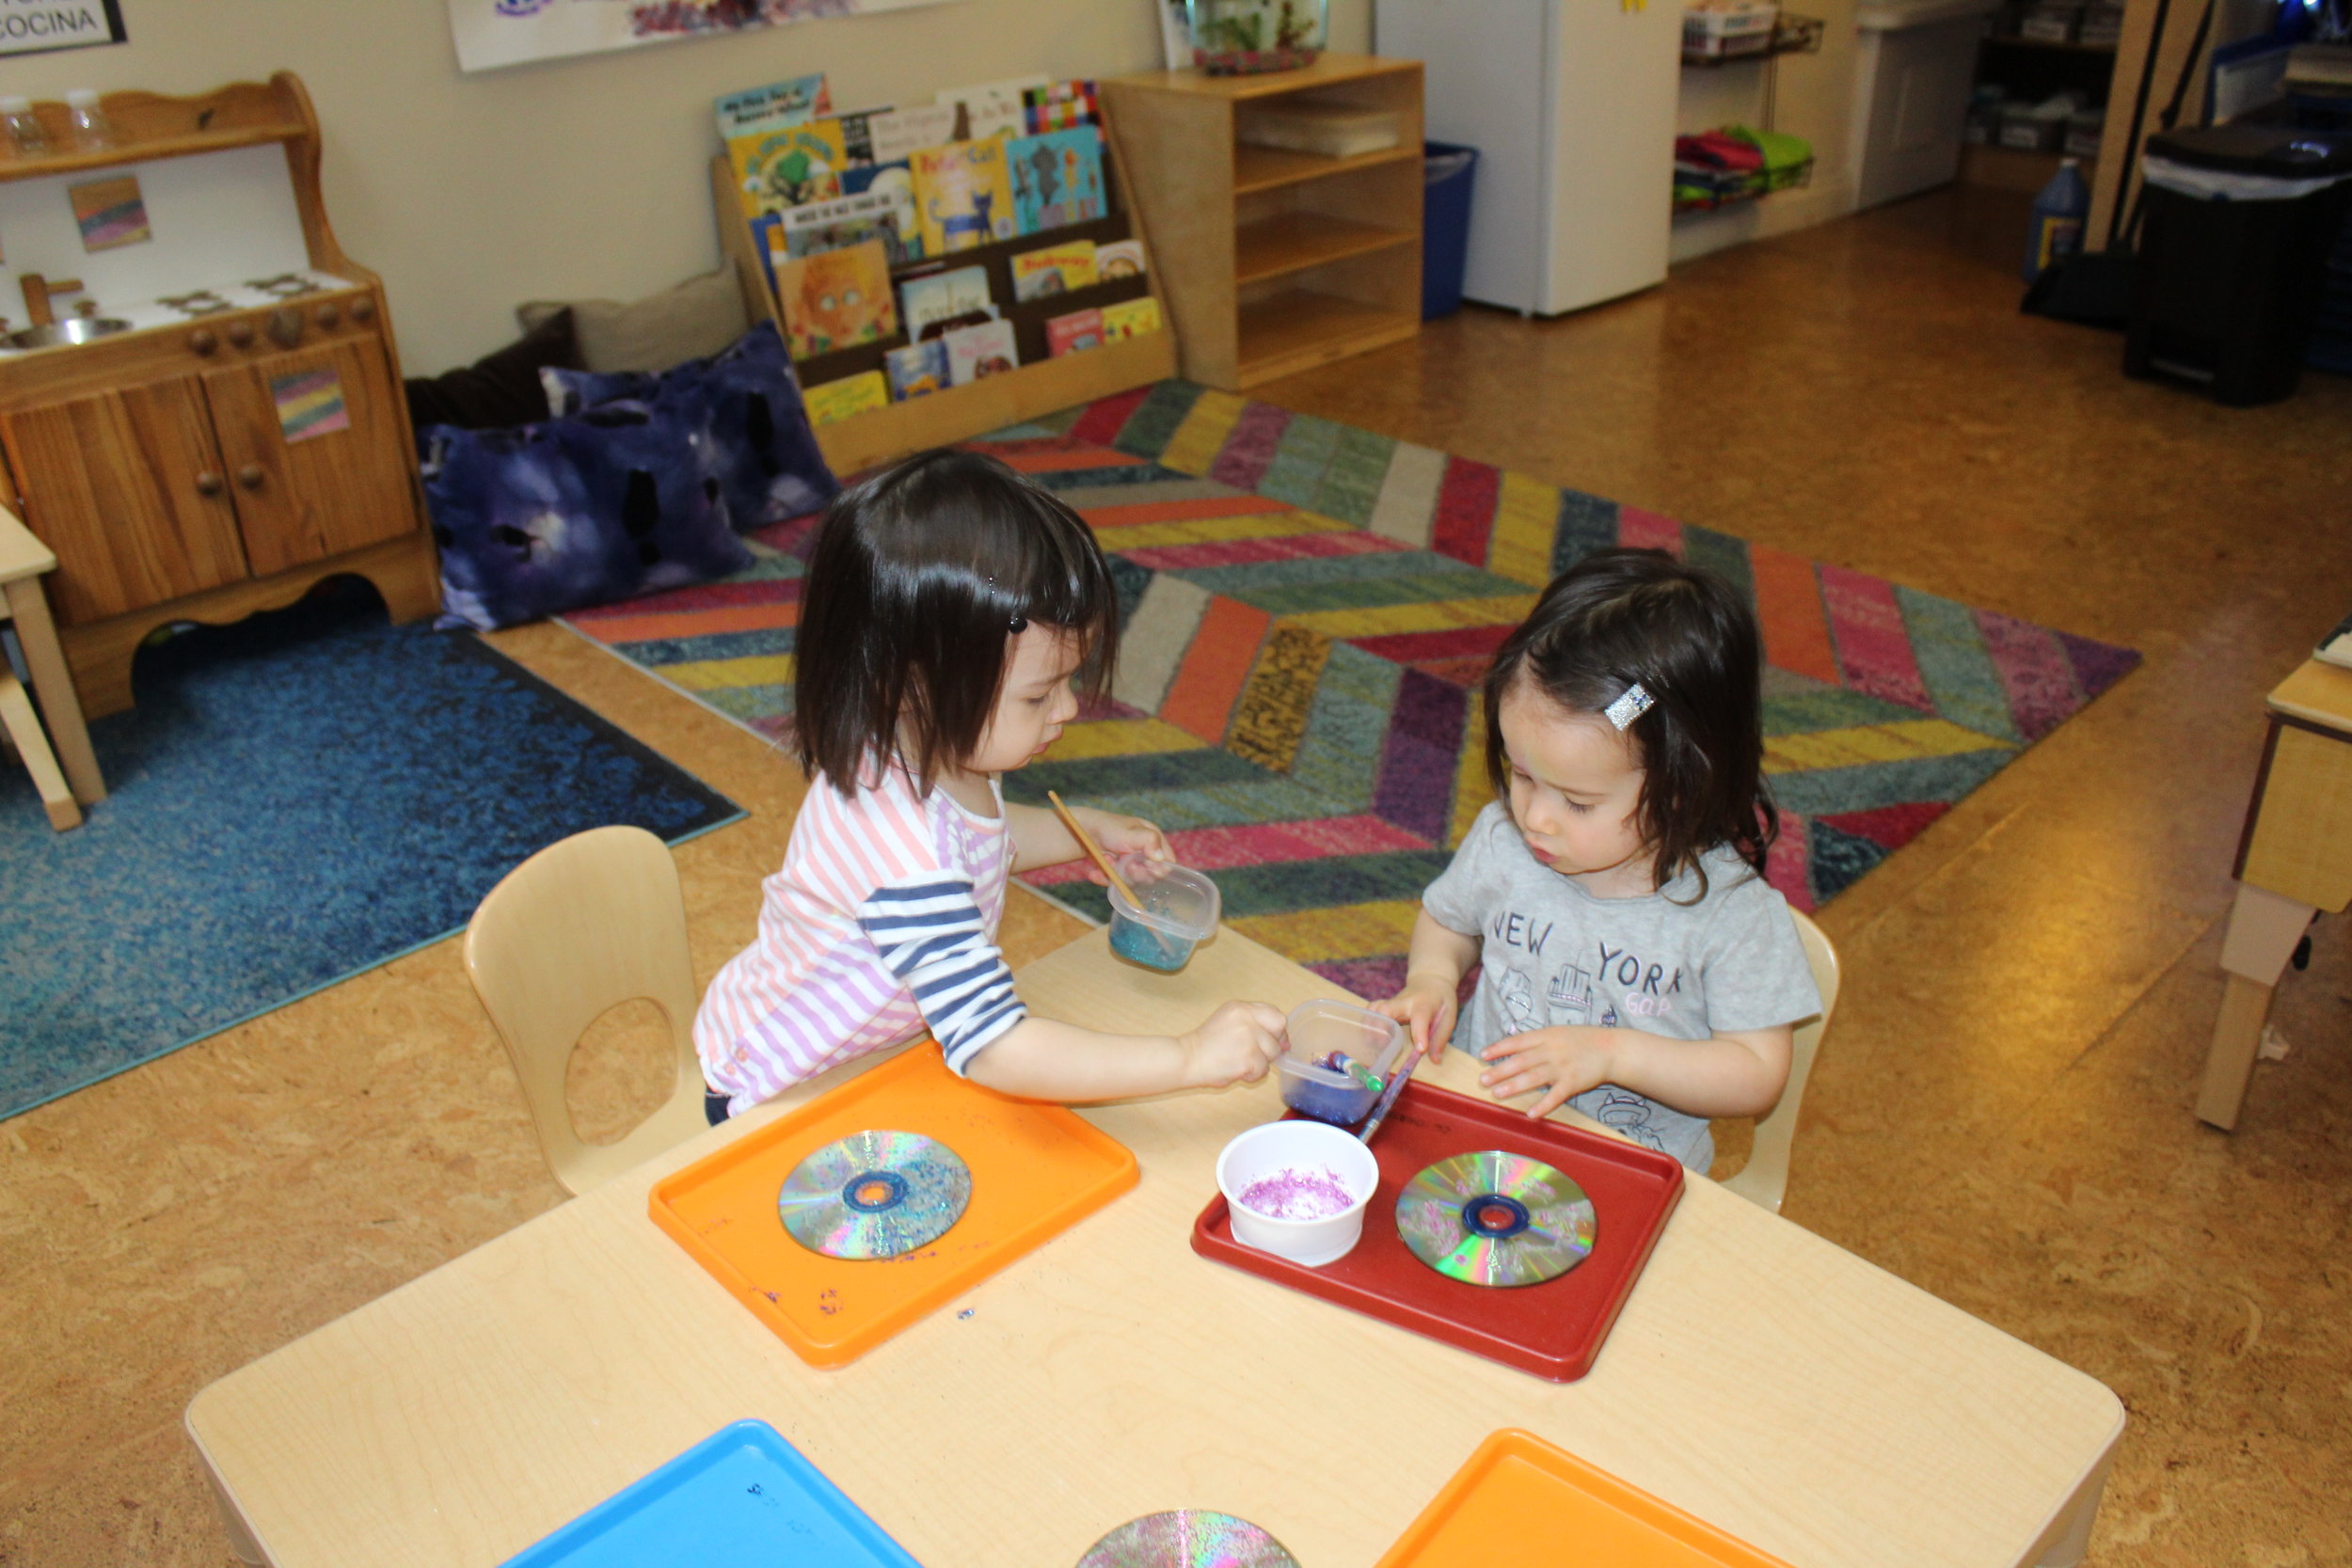     Some children were creating suncatchers by adorning CDs.&nbsp; They used glitter, glue, and sequins. Each step enhances their cognitive ability, as they think about their choices.&nbsp; They selected two different colors of glitter and mixed each